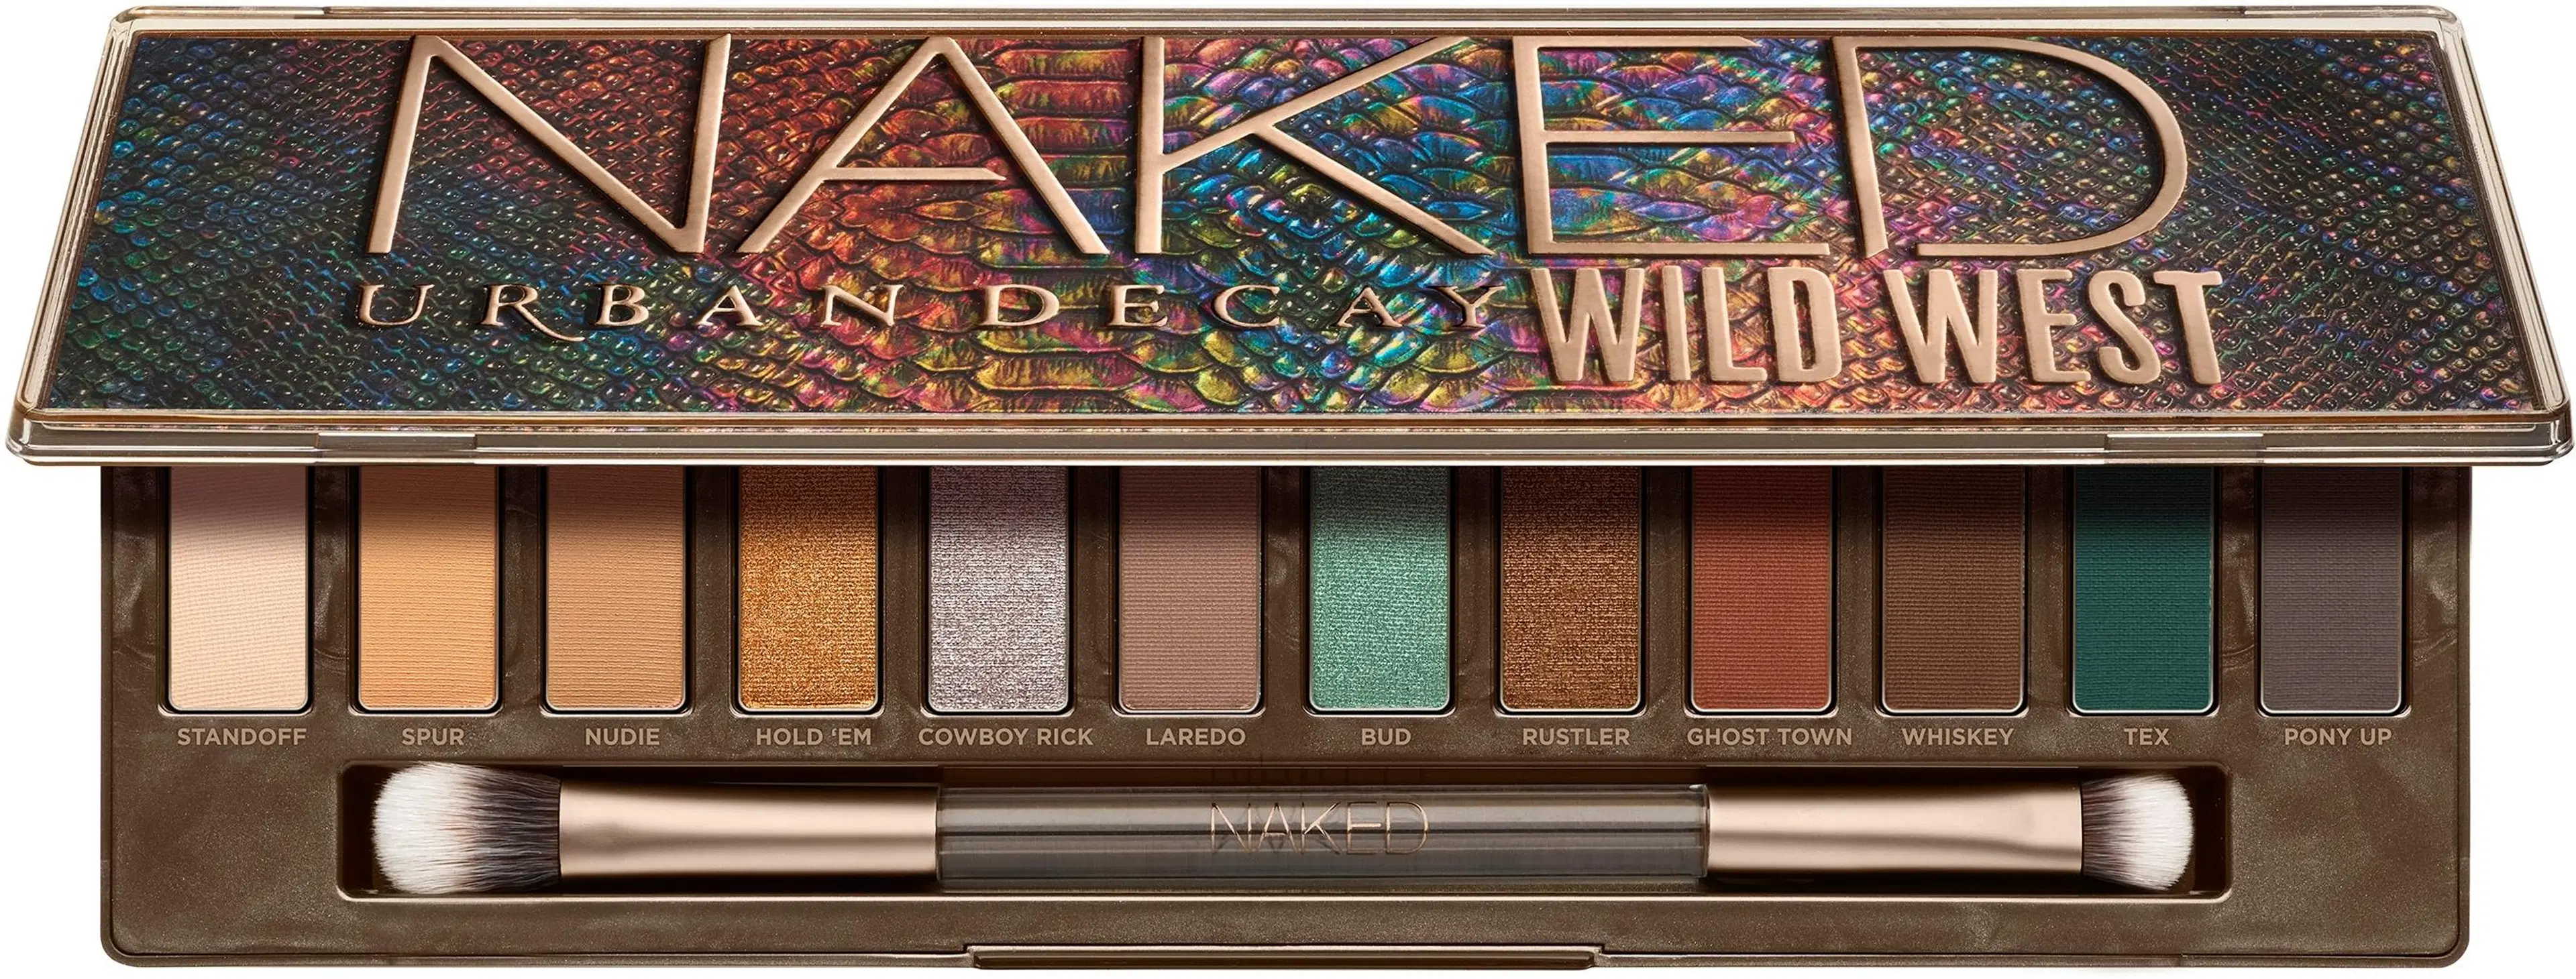 Urban Decay Naked Wild West Eyeshadow Palette luomiväripaletti